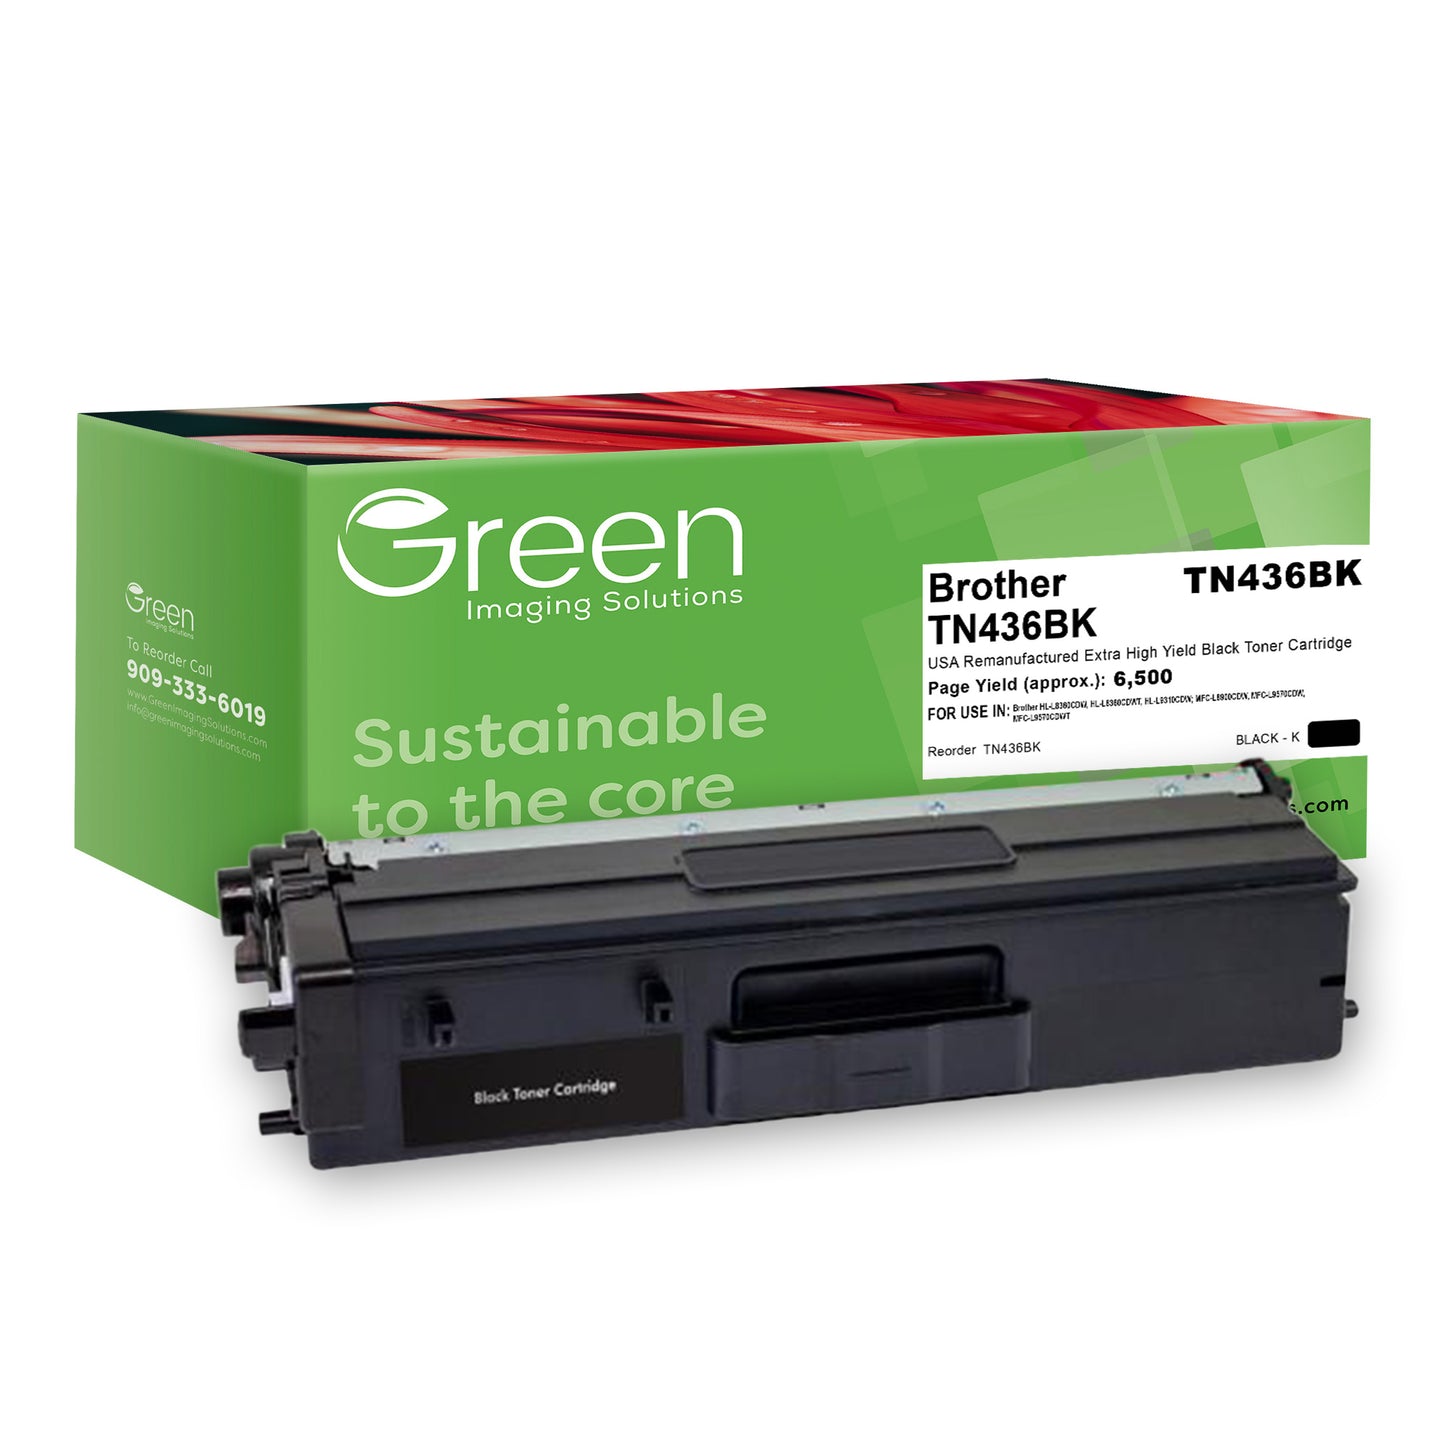 Green Imaging Solutions USA Remanufactured Extra High Yield Black Toner Cartridge for Brother TN436BK